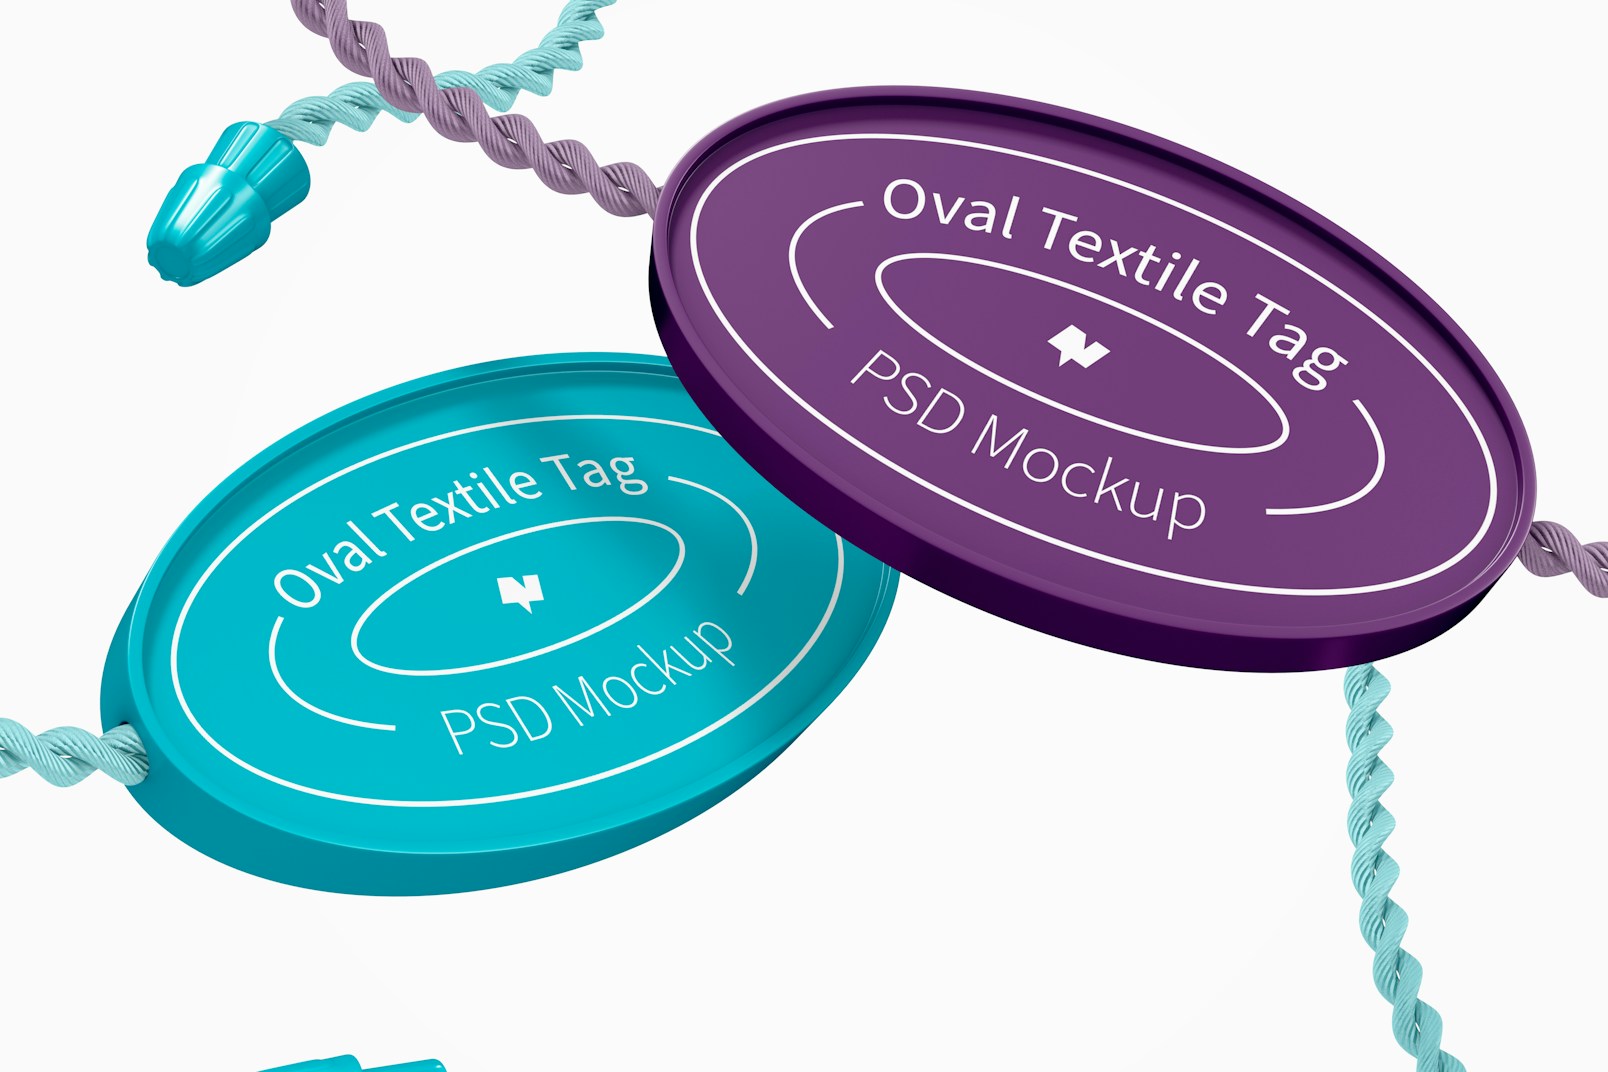 Oval Textile Tags Mockup, Floating